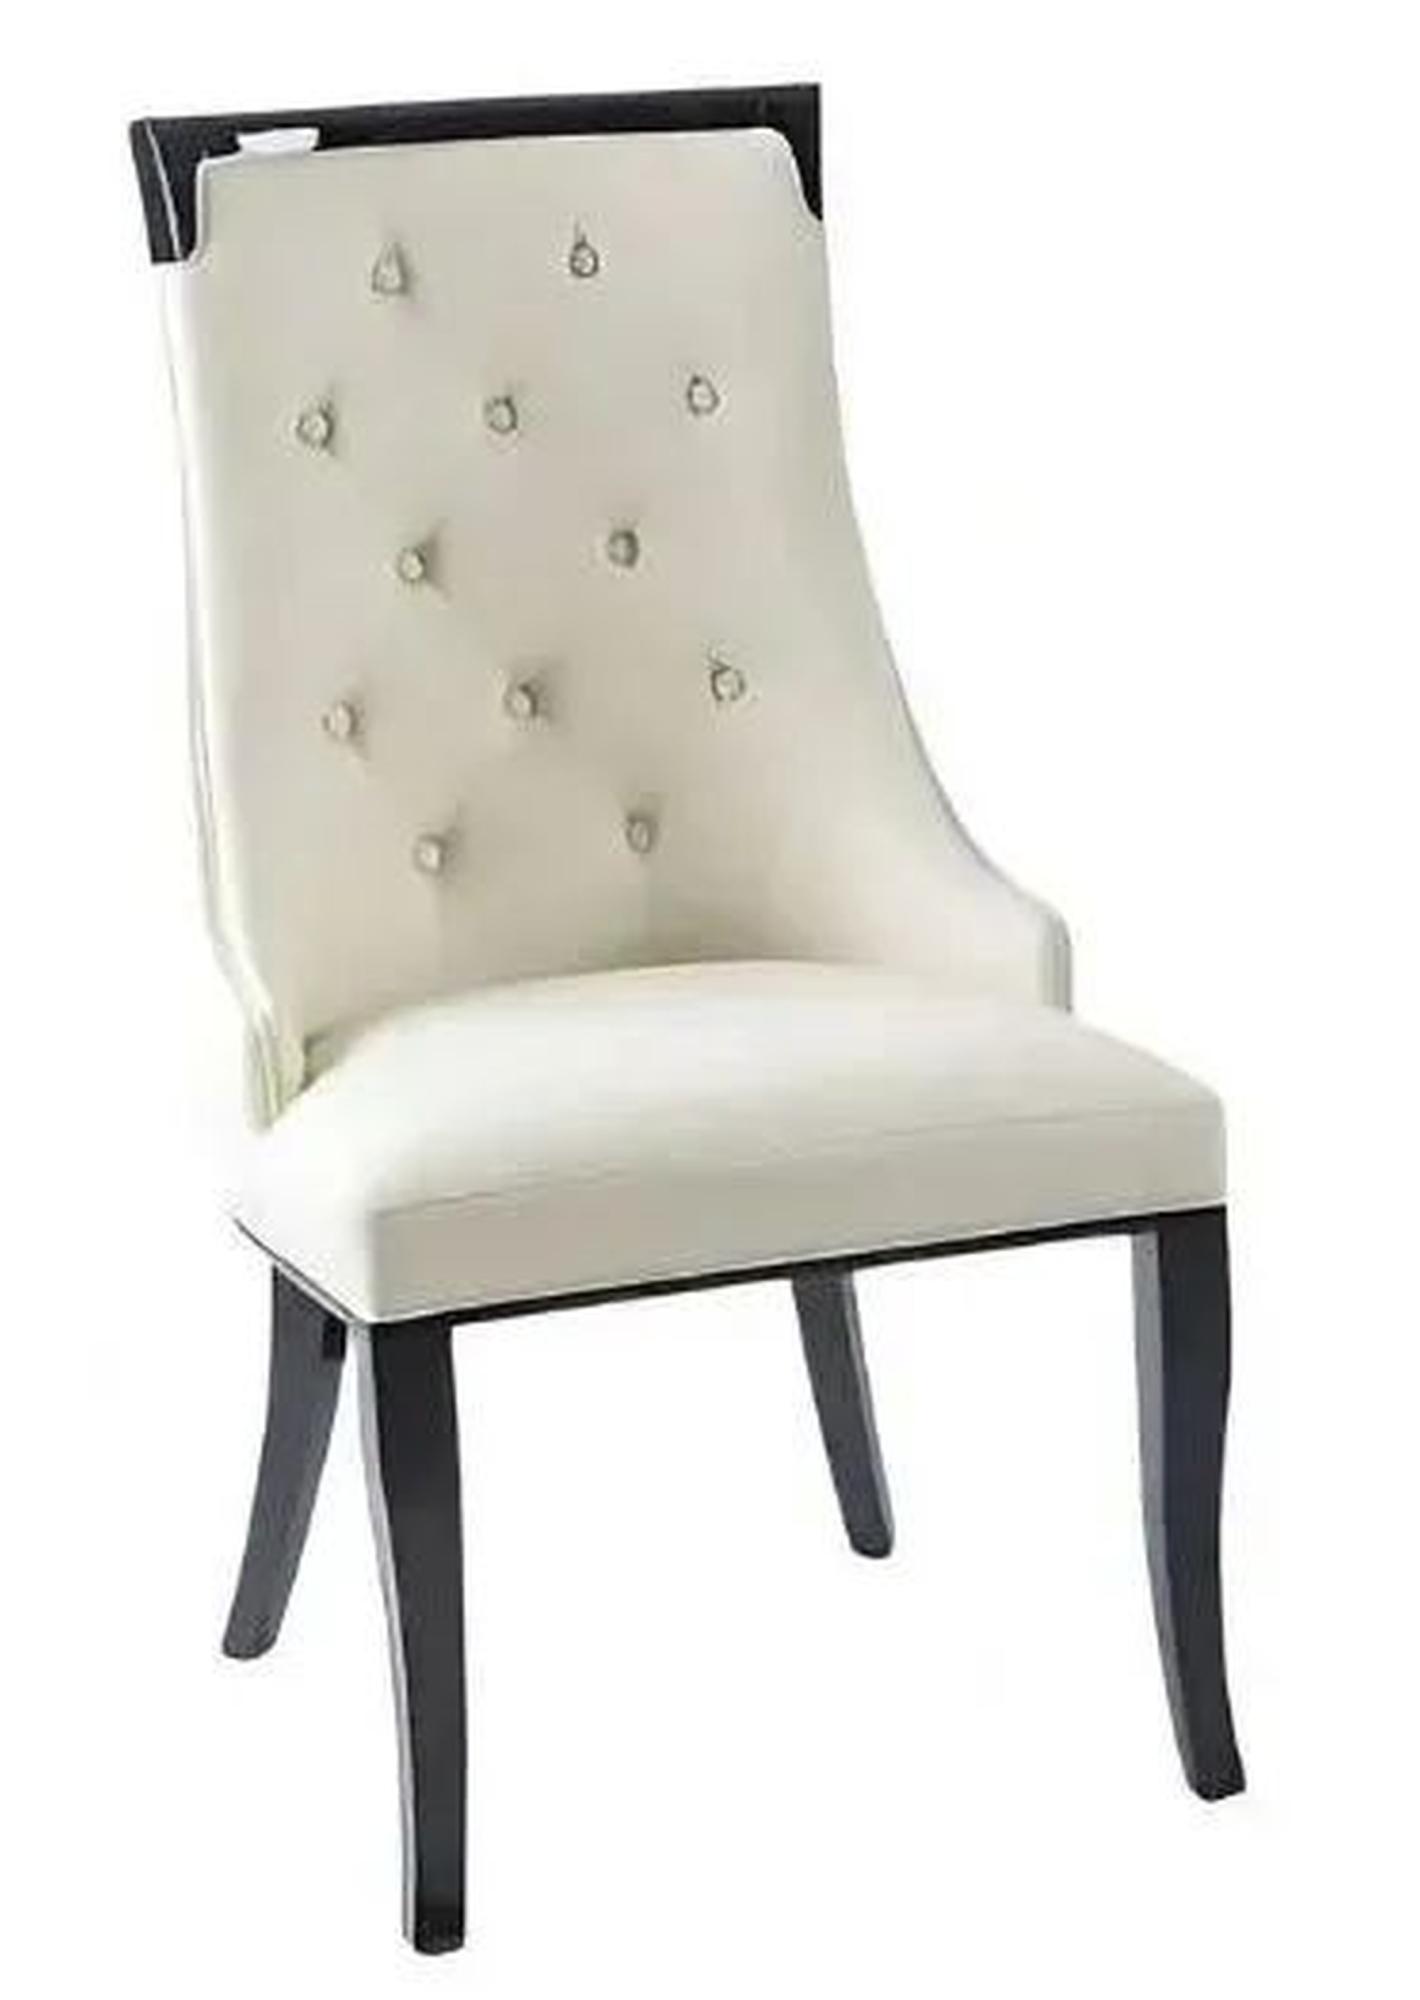 Carmela Cream Dining Chair, Leather - Faux PU Tufted Scoop Back with Black Wooden Legs